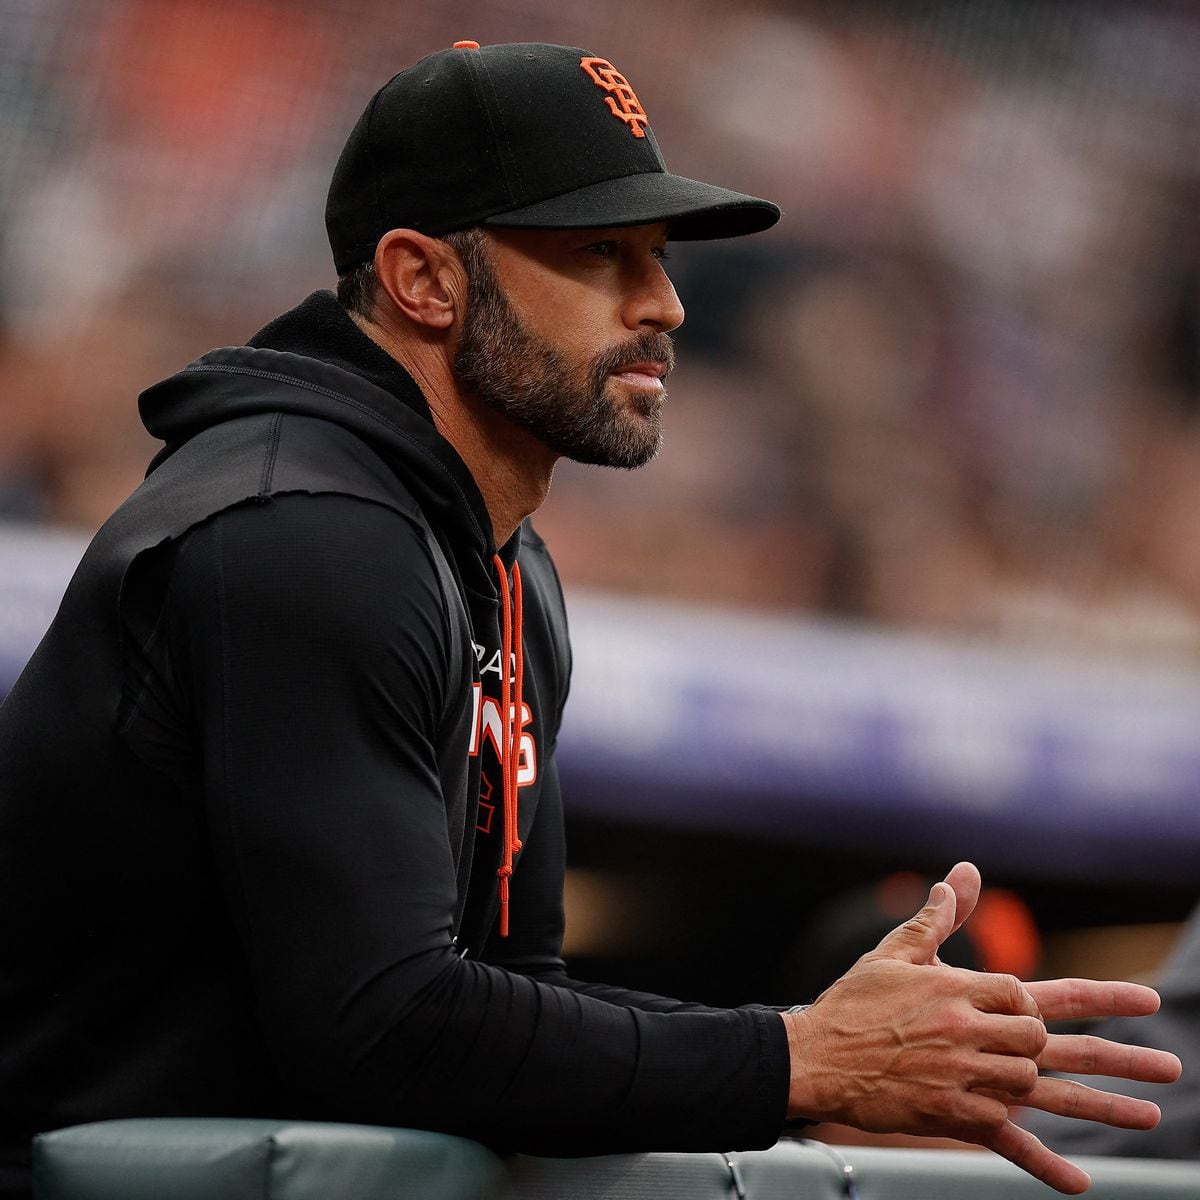 San Francisco Giants manager won't stand for anthem following